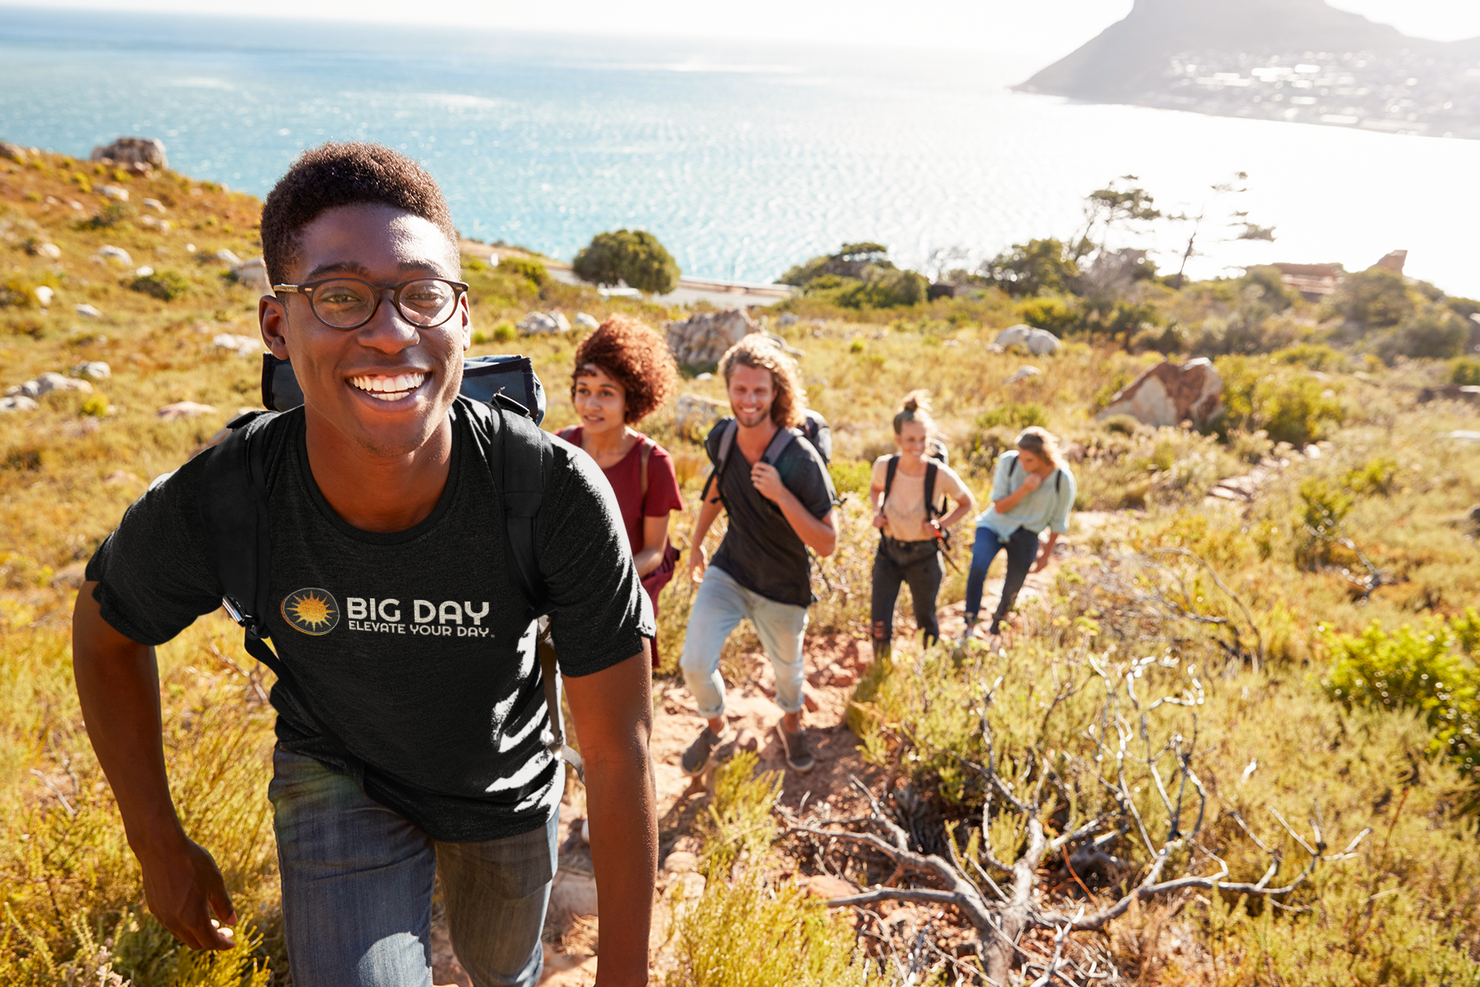 BIG DAY® Elevate Your Day Collection - Man hiking hill with friends wearing BIG DAY Elevate Your Day Black T-shirt